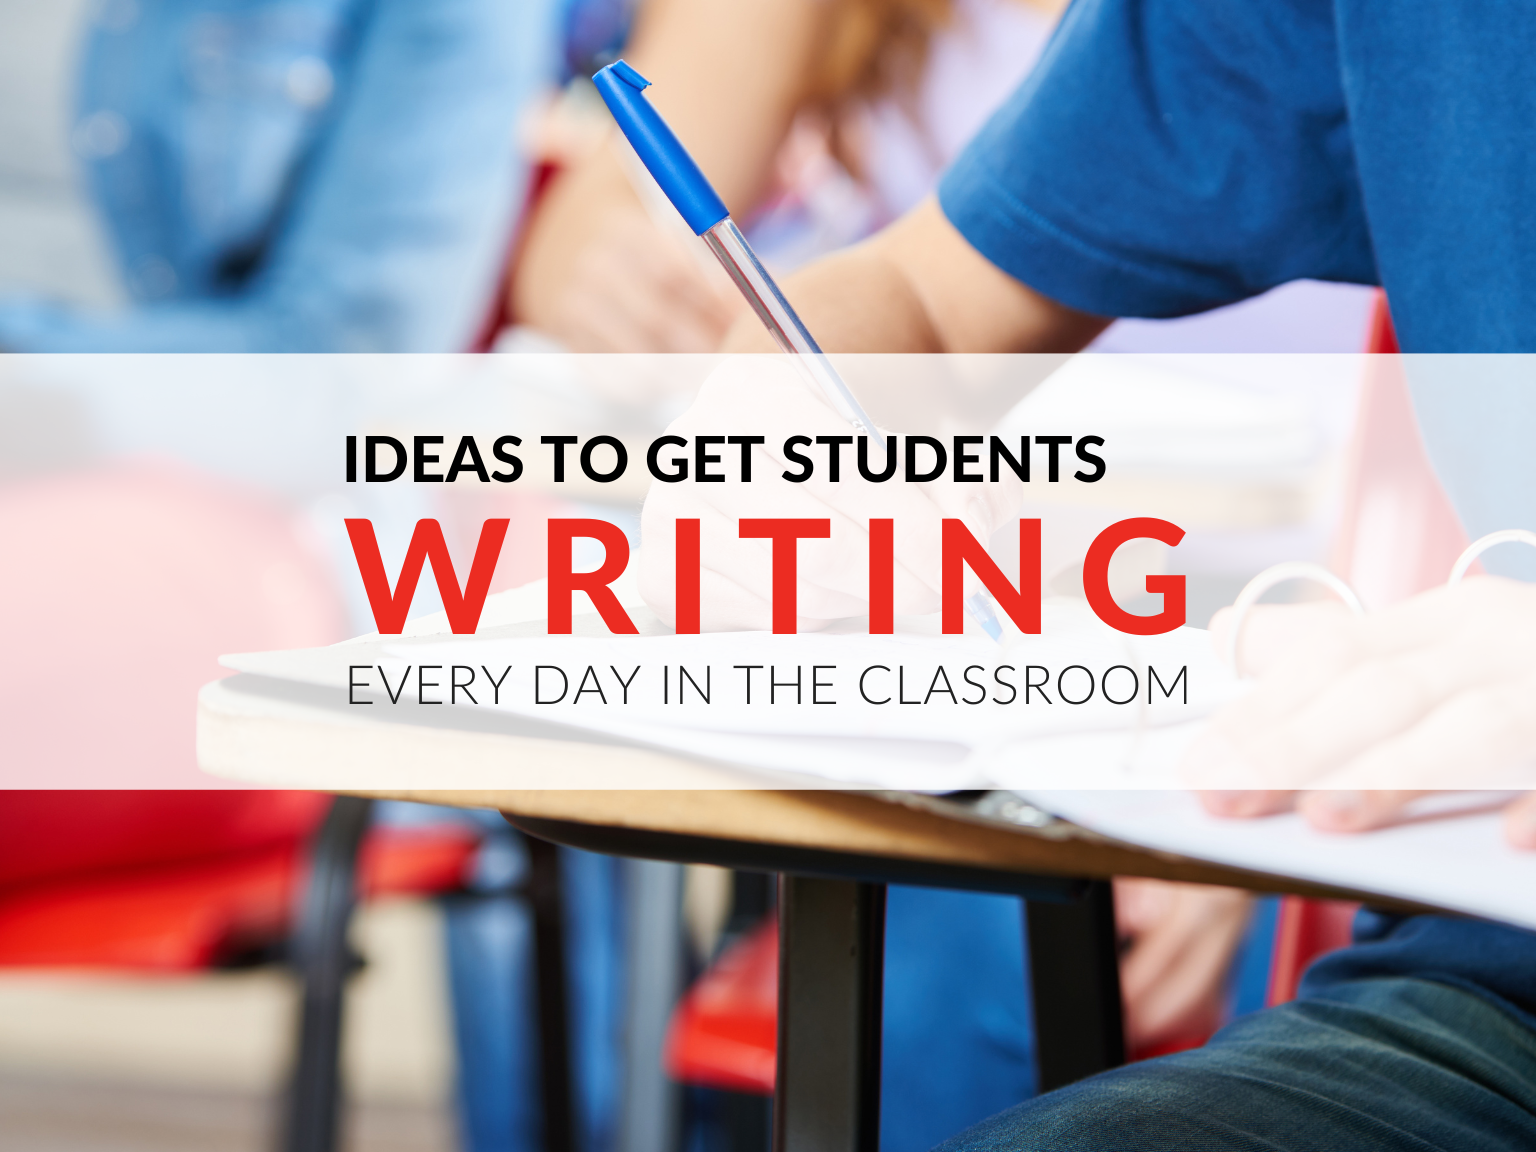 ideas-to-get-students-writing-every-day-in-class